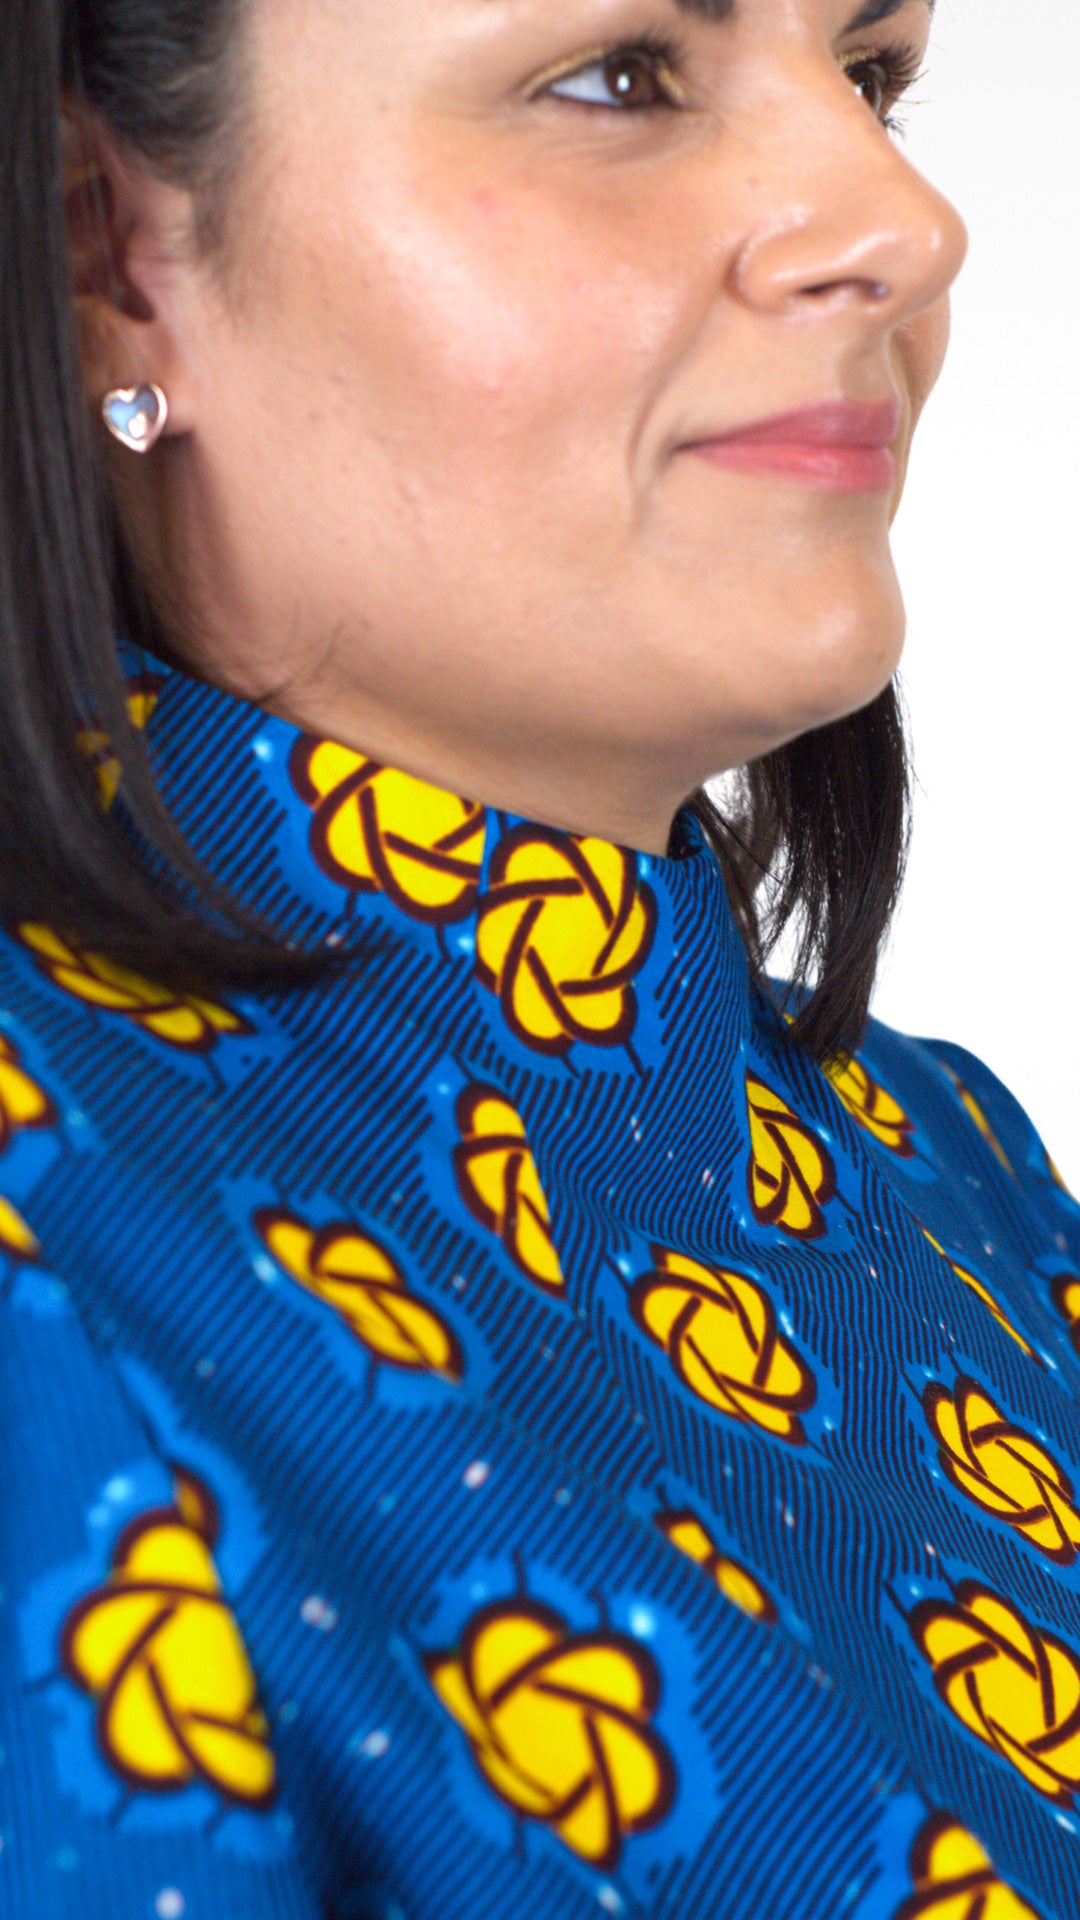 A side close-up view captures the details of the neckline of the blue dress, adorned with yellow elements.